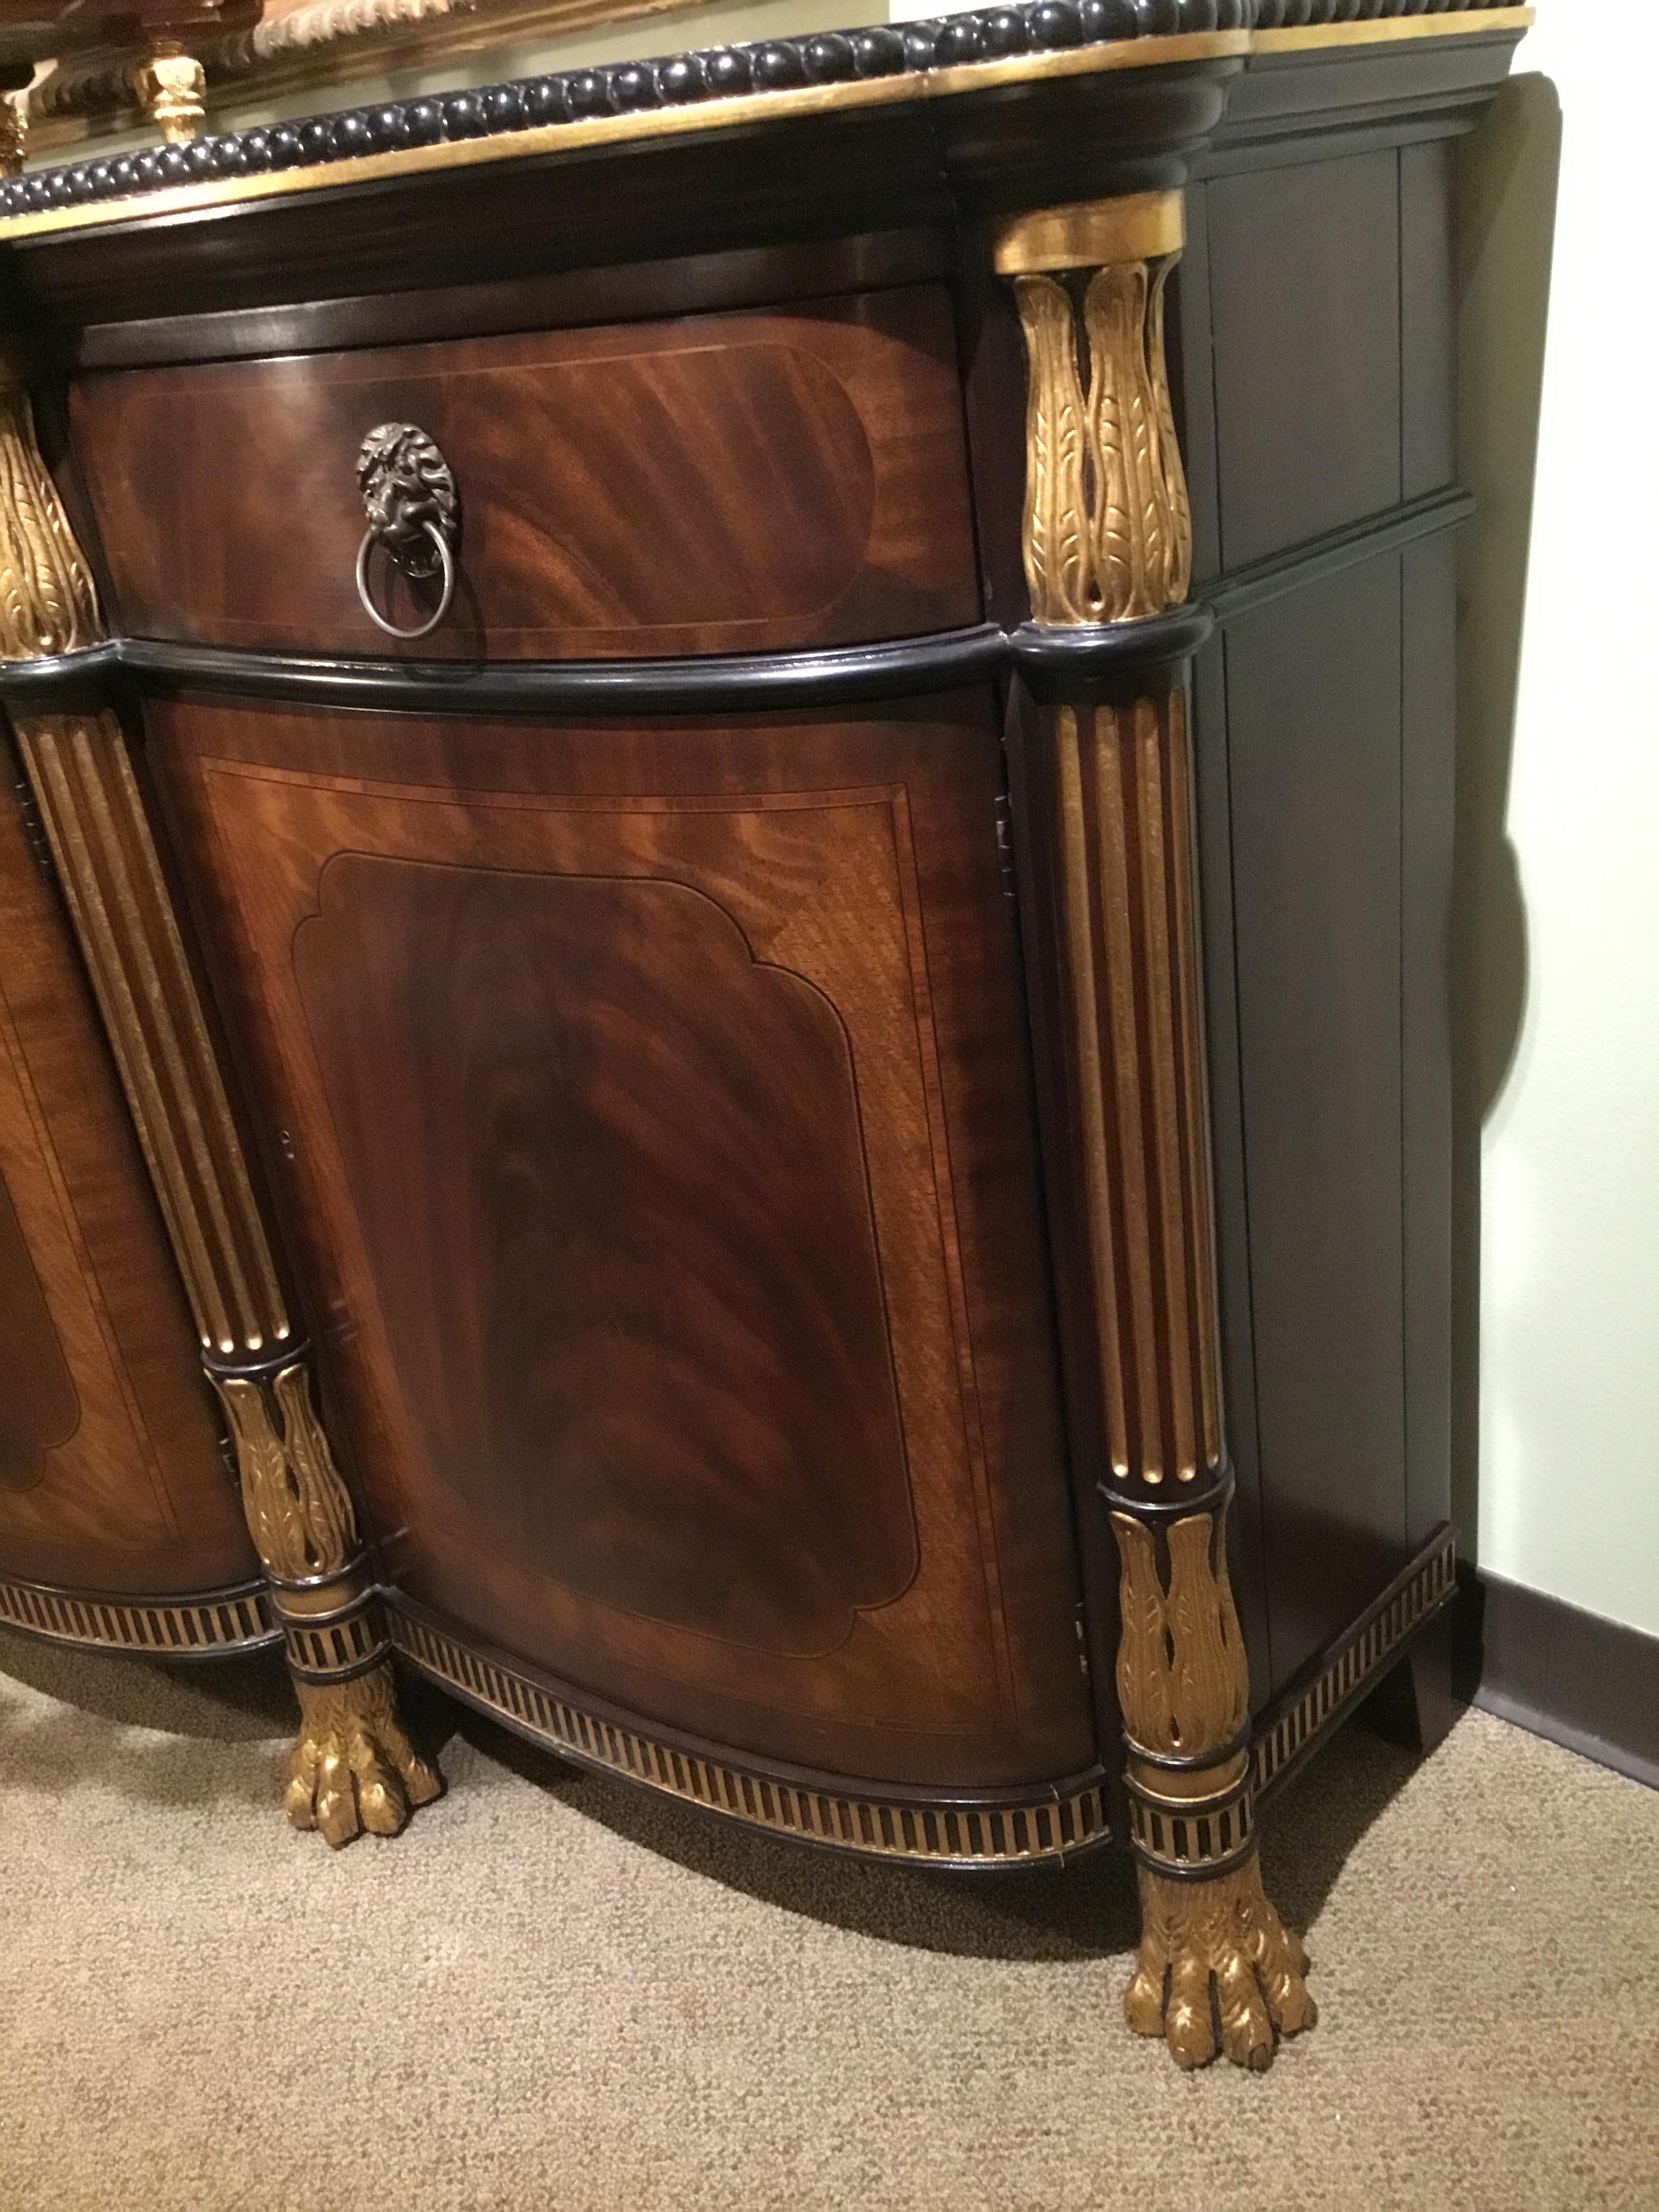 French Regency Style Buffet/Sideboard, Mahogany Woods and Veneers, Gilt Trim 1